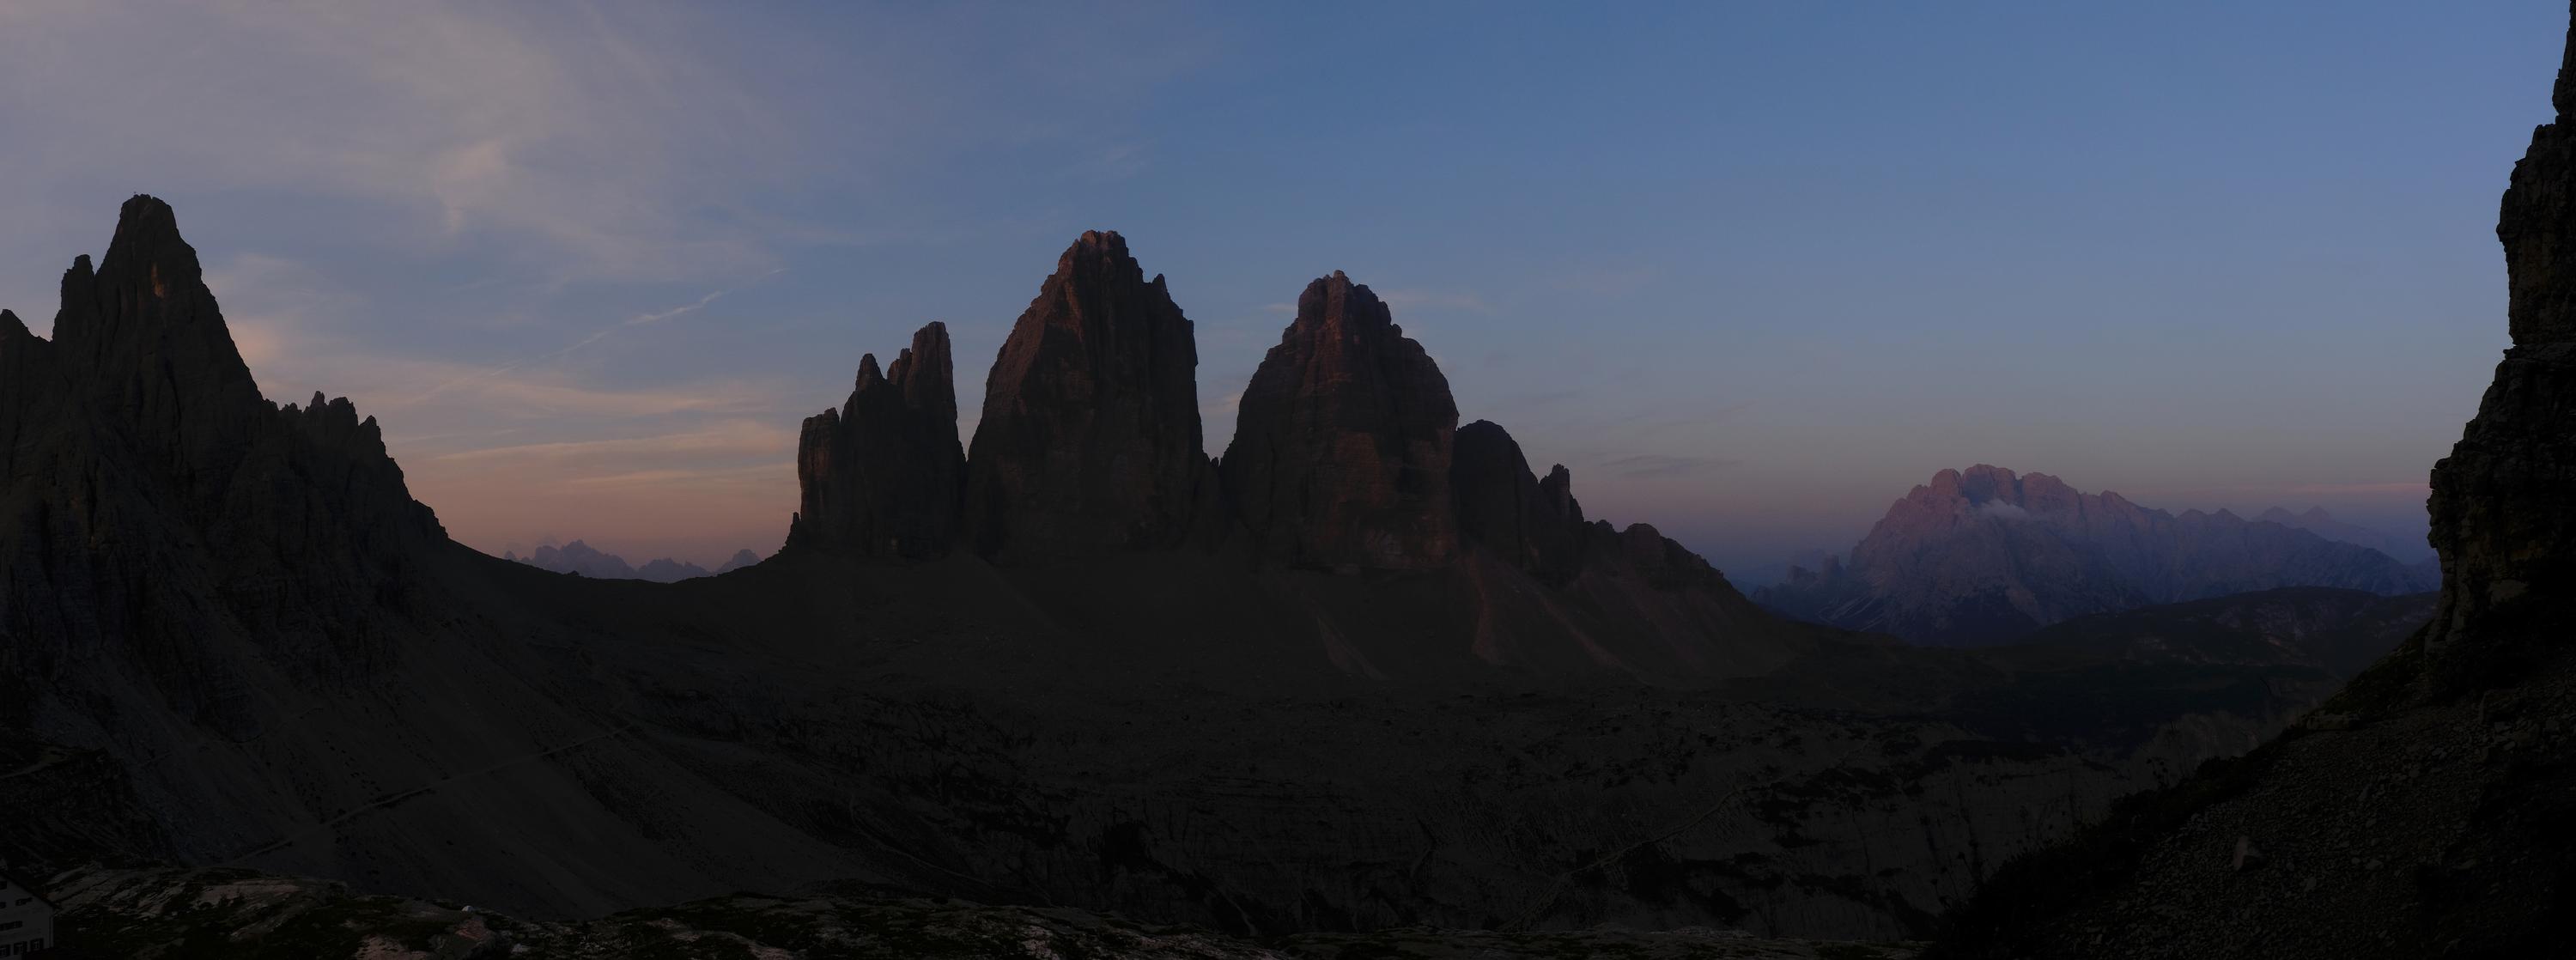 The Three Peaks of Lavaredo viewed from my cave first thing in the morning. Dolomites, Italy